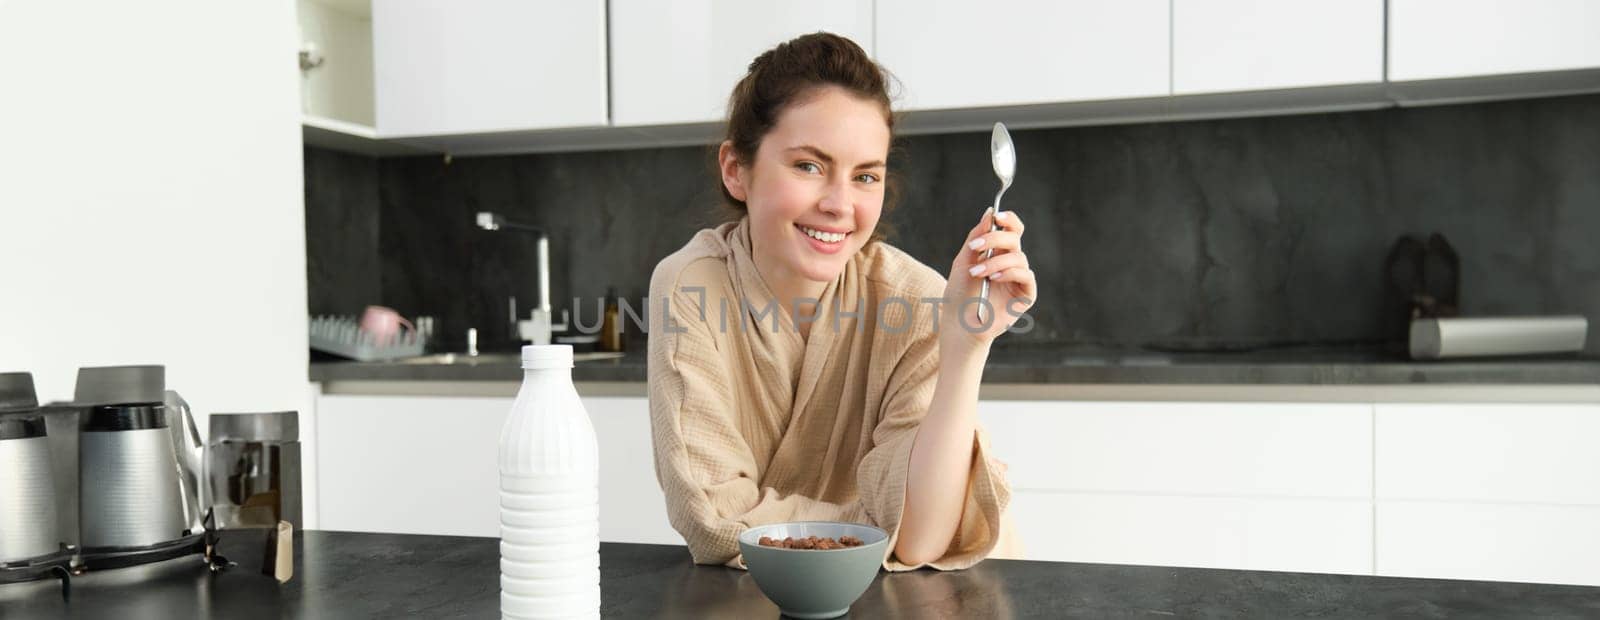 Portrait of beautiful young and healthy woman in bathrobe eats her breakfast in kitchen, has cereals with milk and smiling.